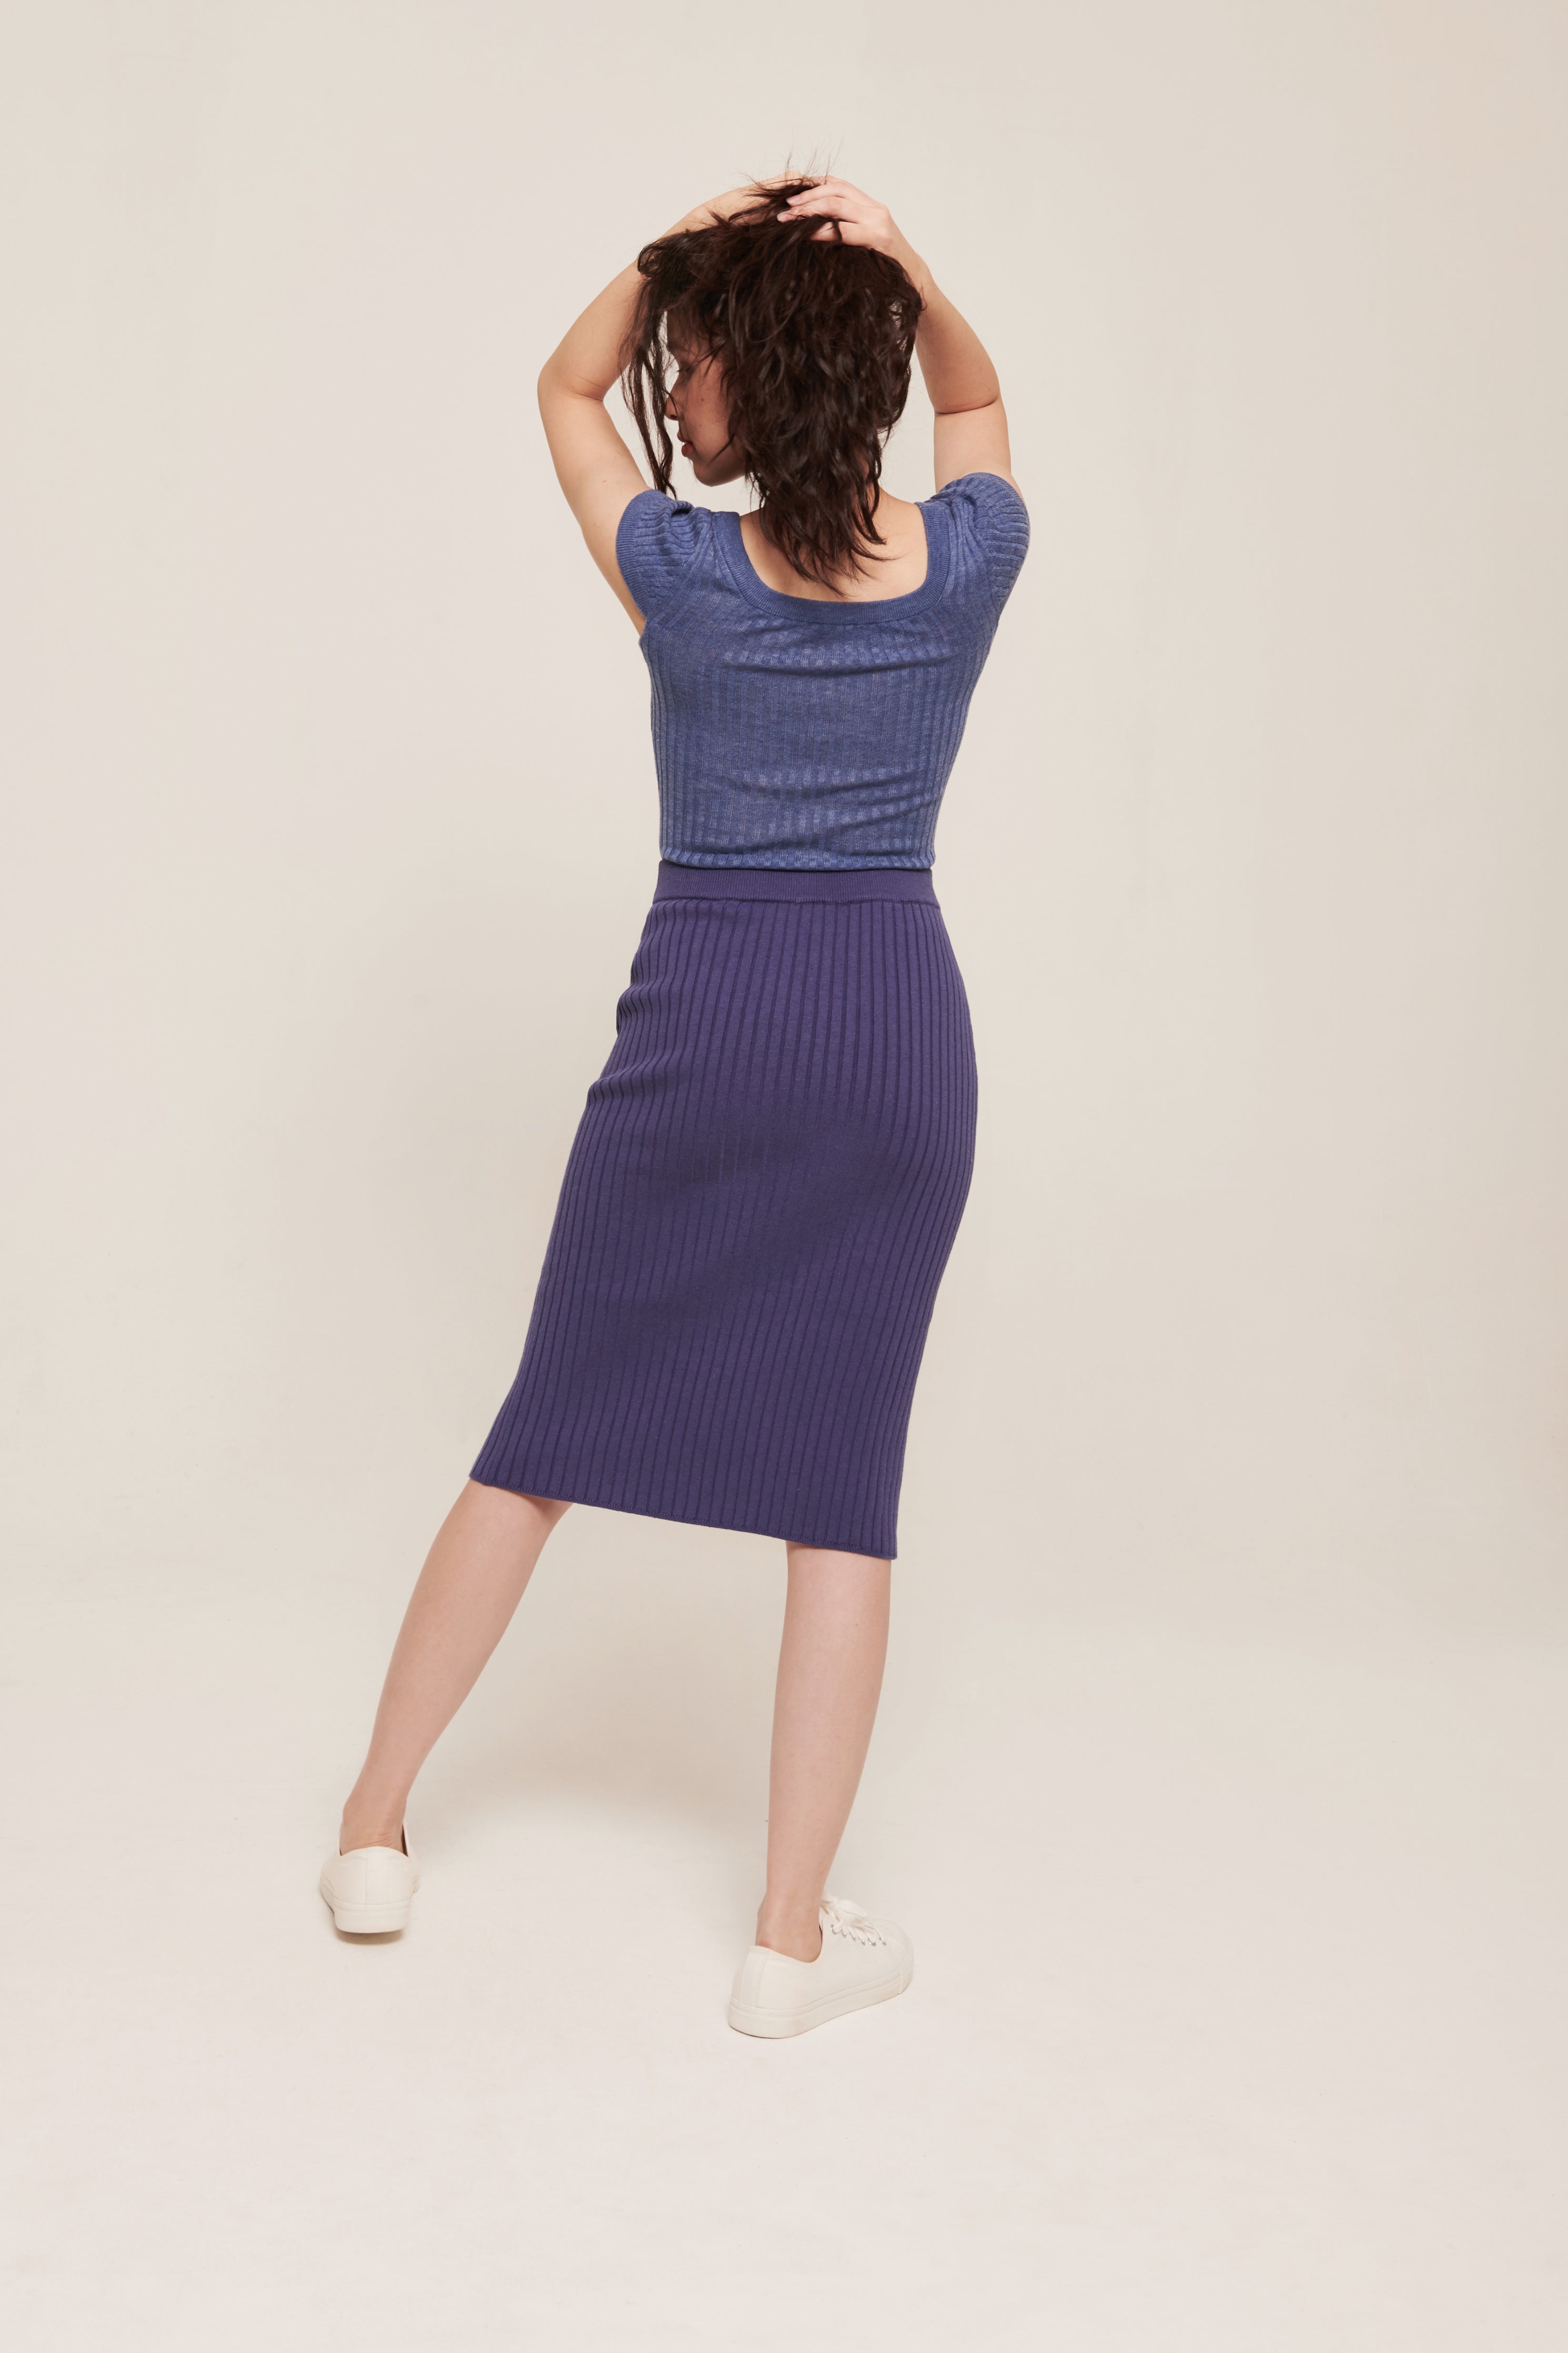 hello ronron | Lynn Top Lavender | Square neck ribbed knit top